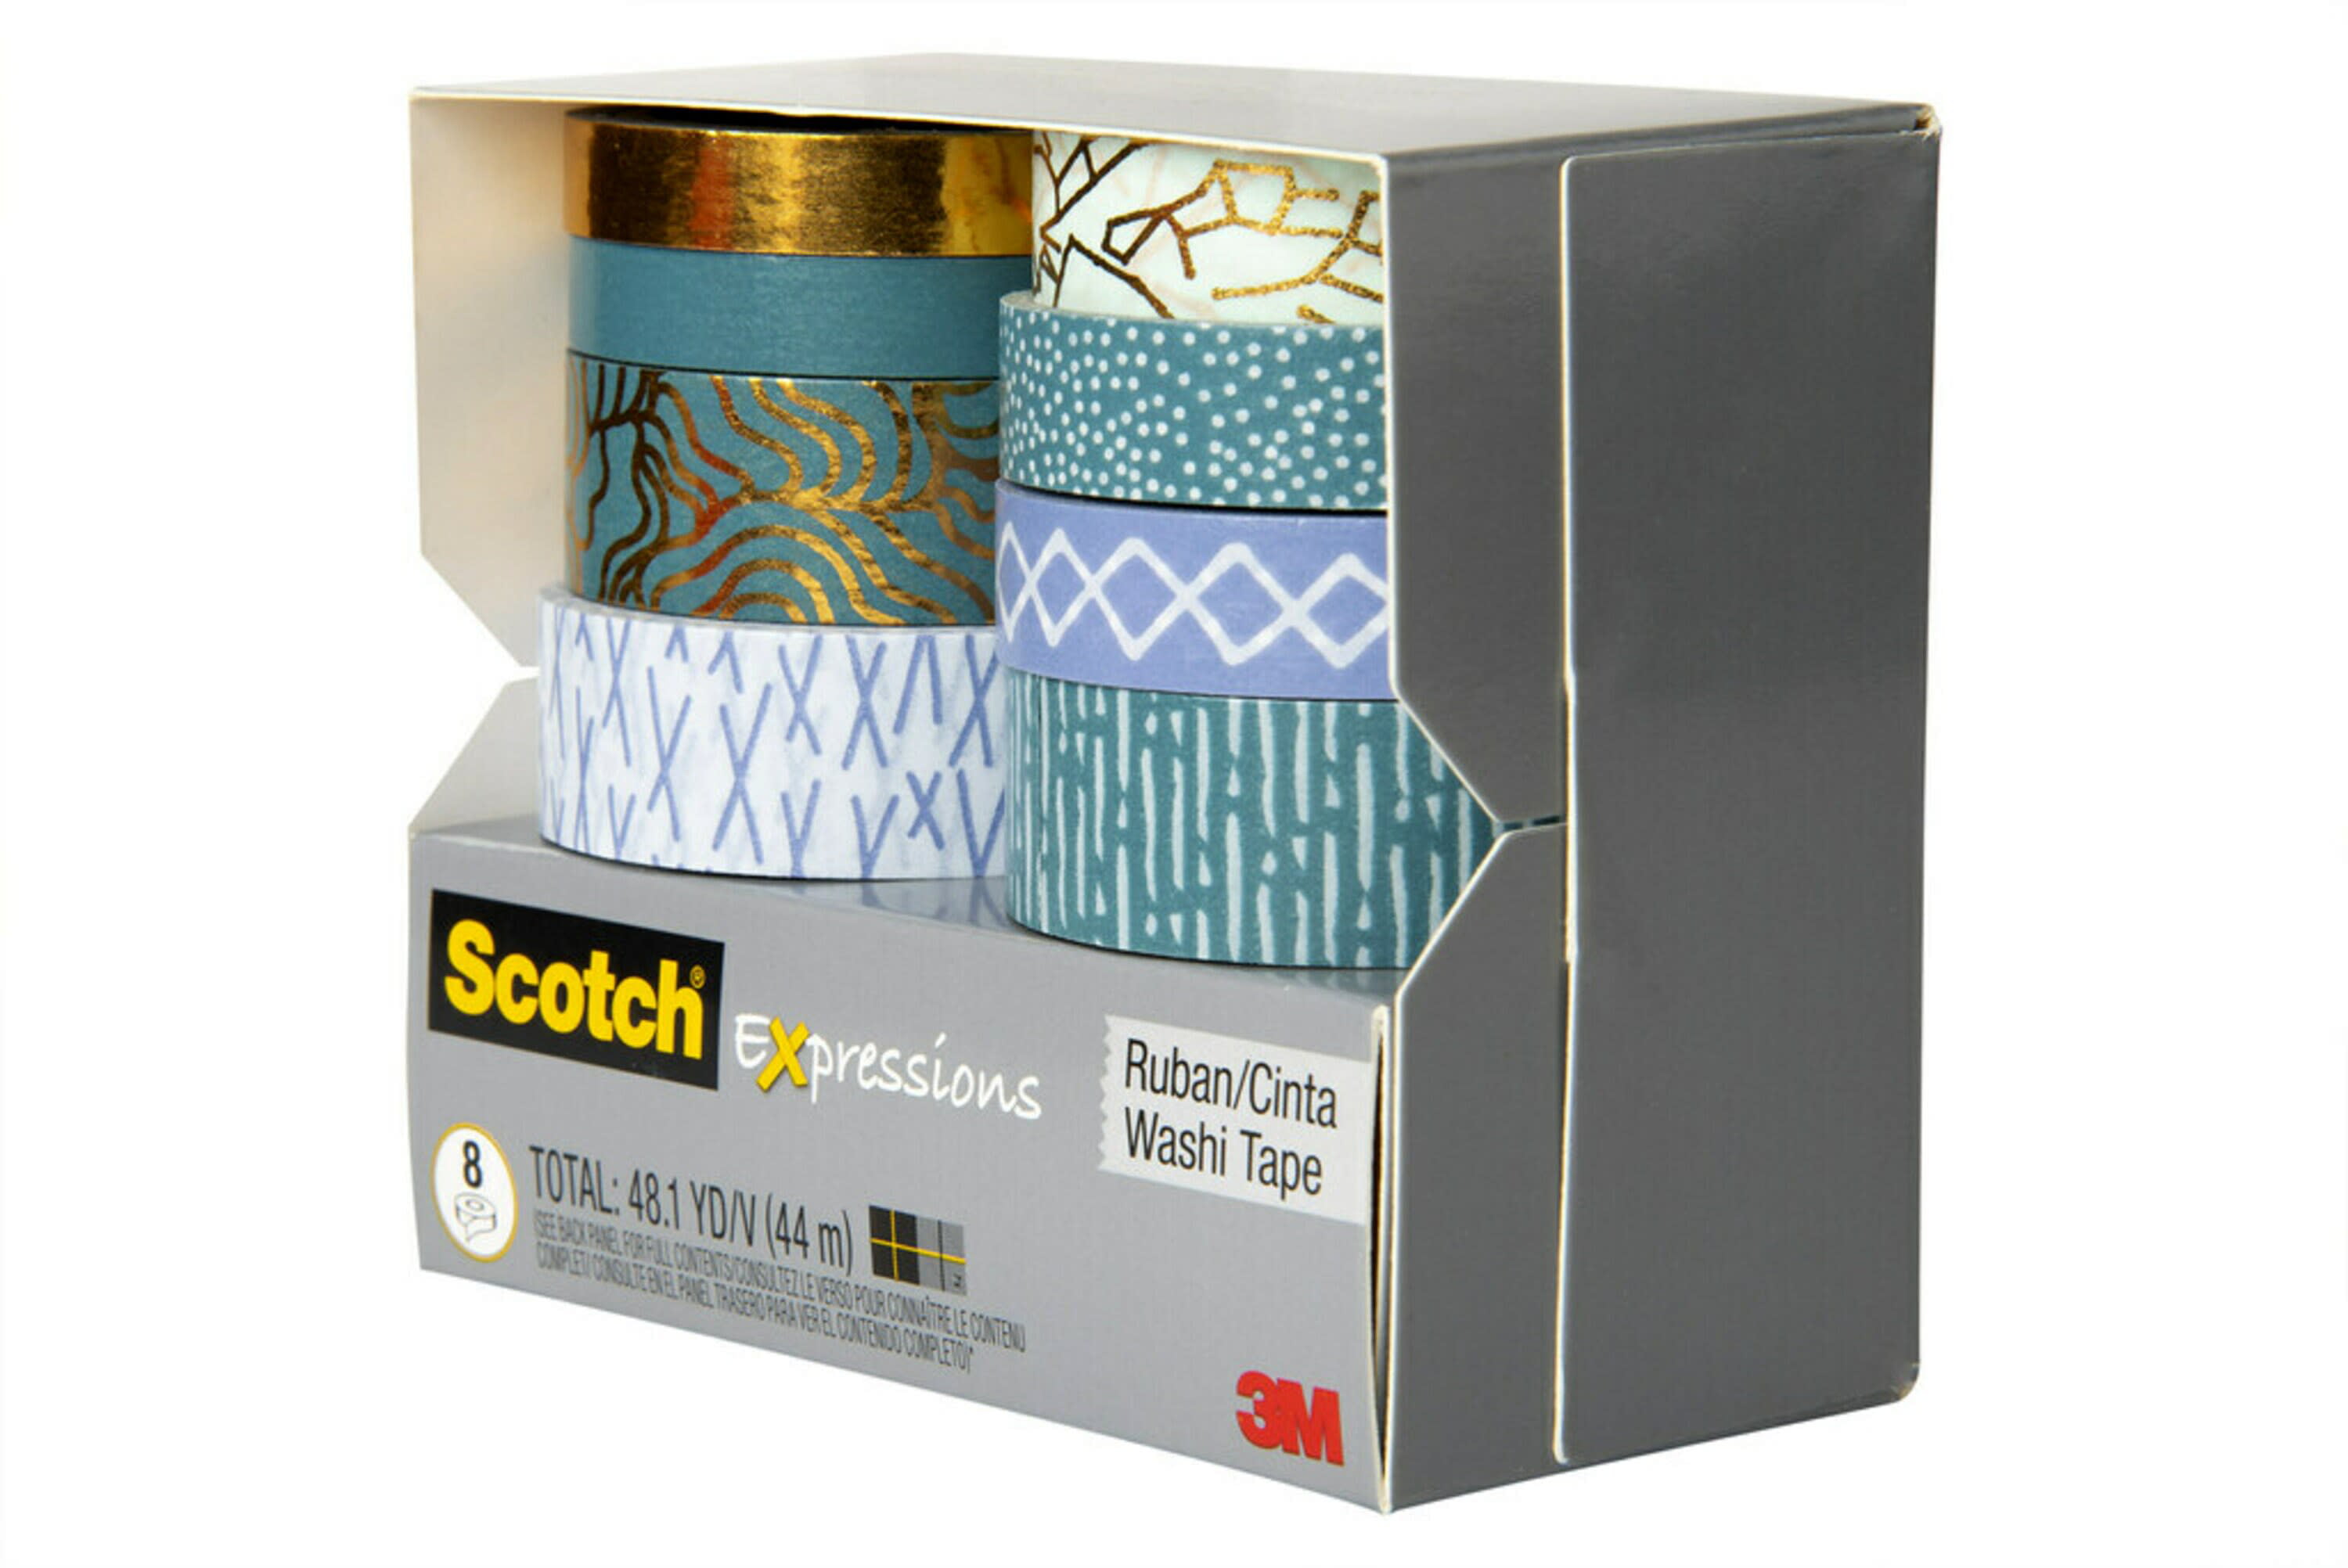 NEW Scotch Expressions coloring book washi tape - set of 5 - floral or  geometric